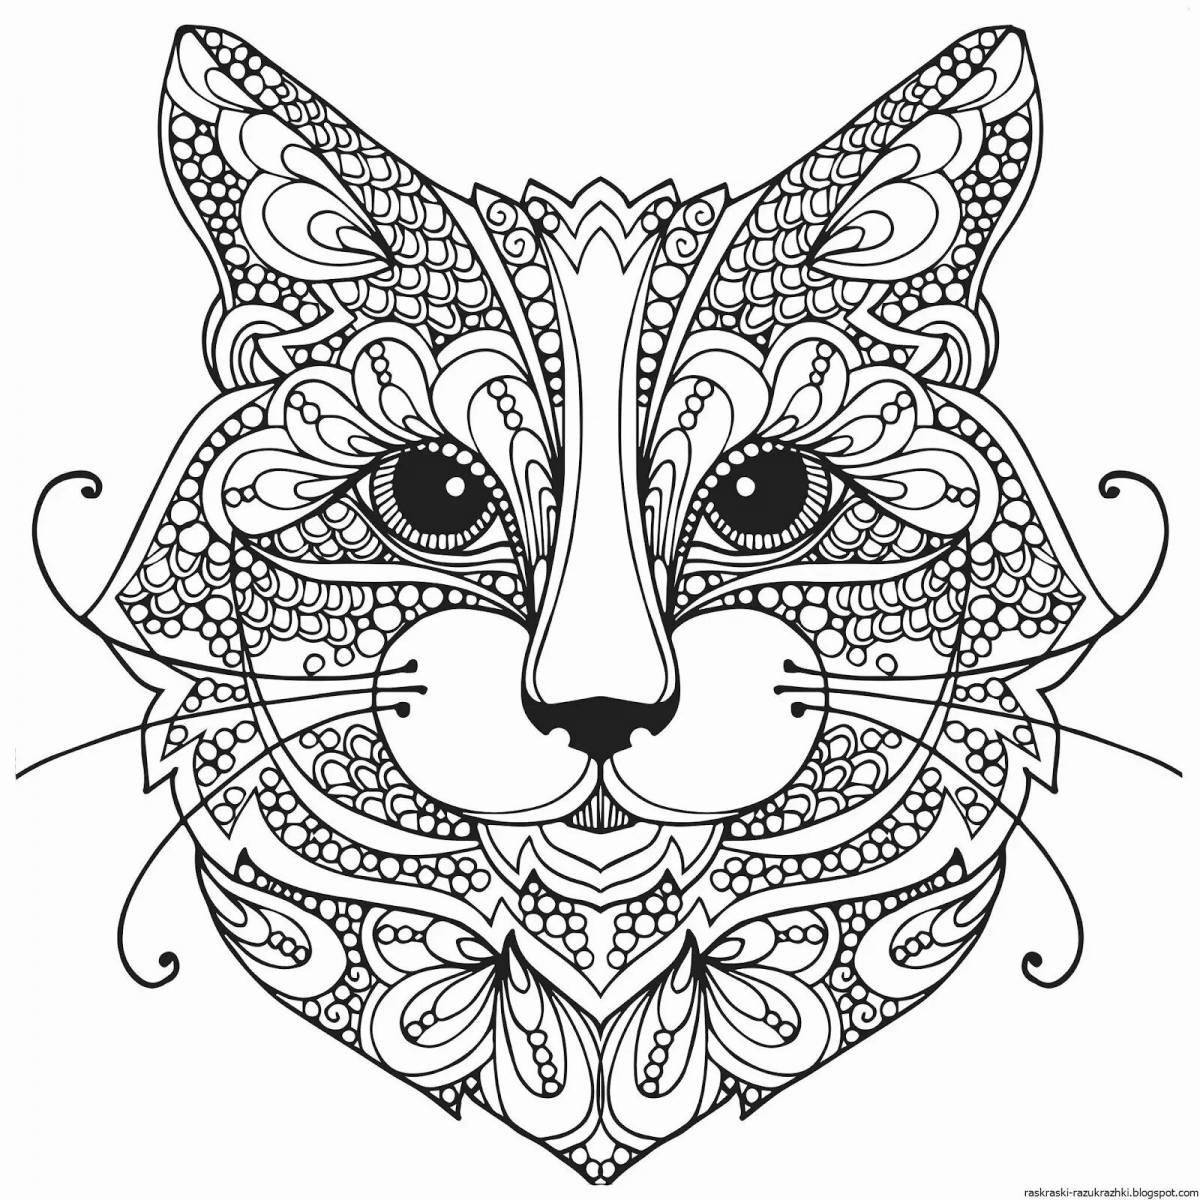 Joyful anti-stress easy coloring pages for girls